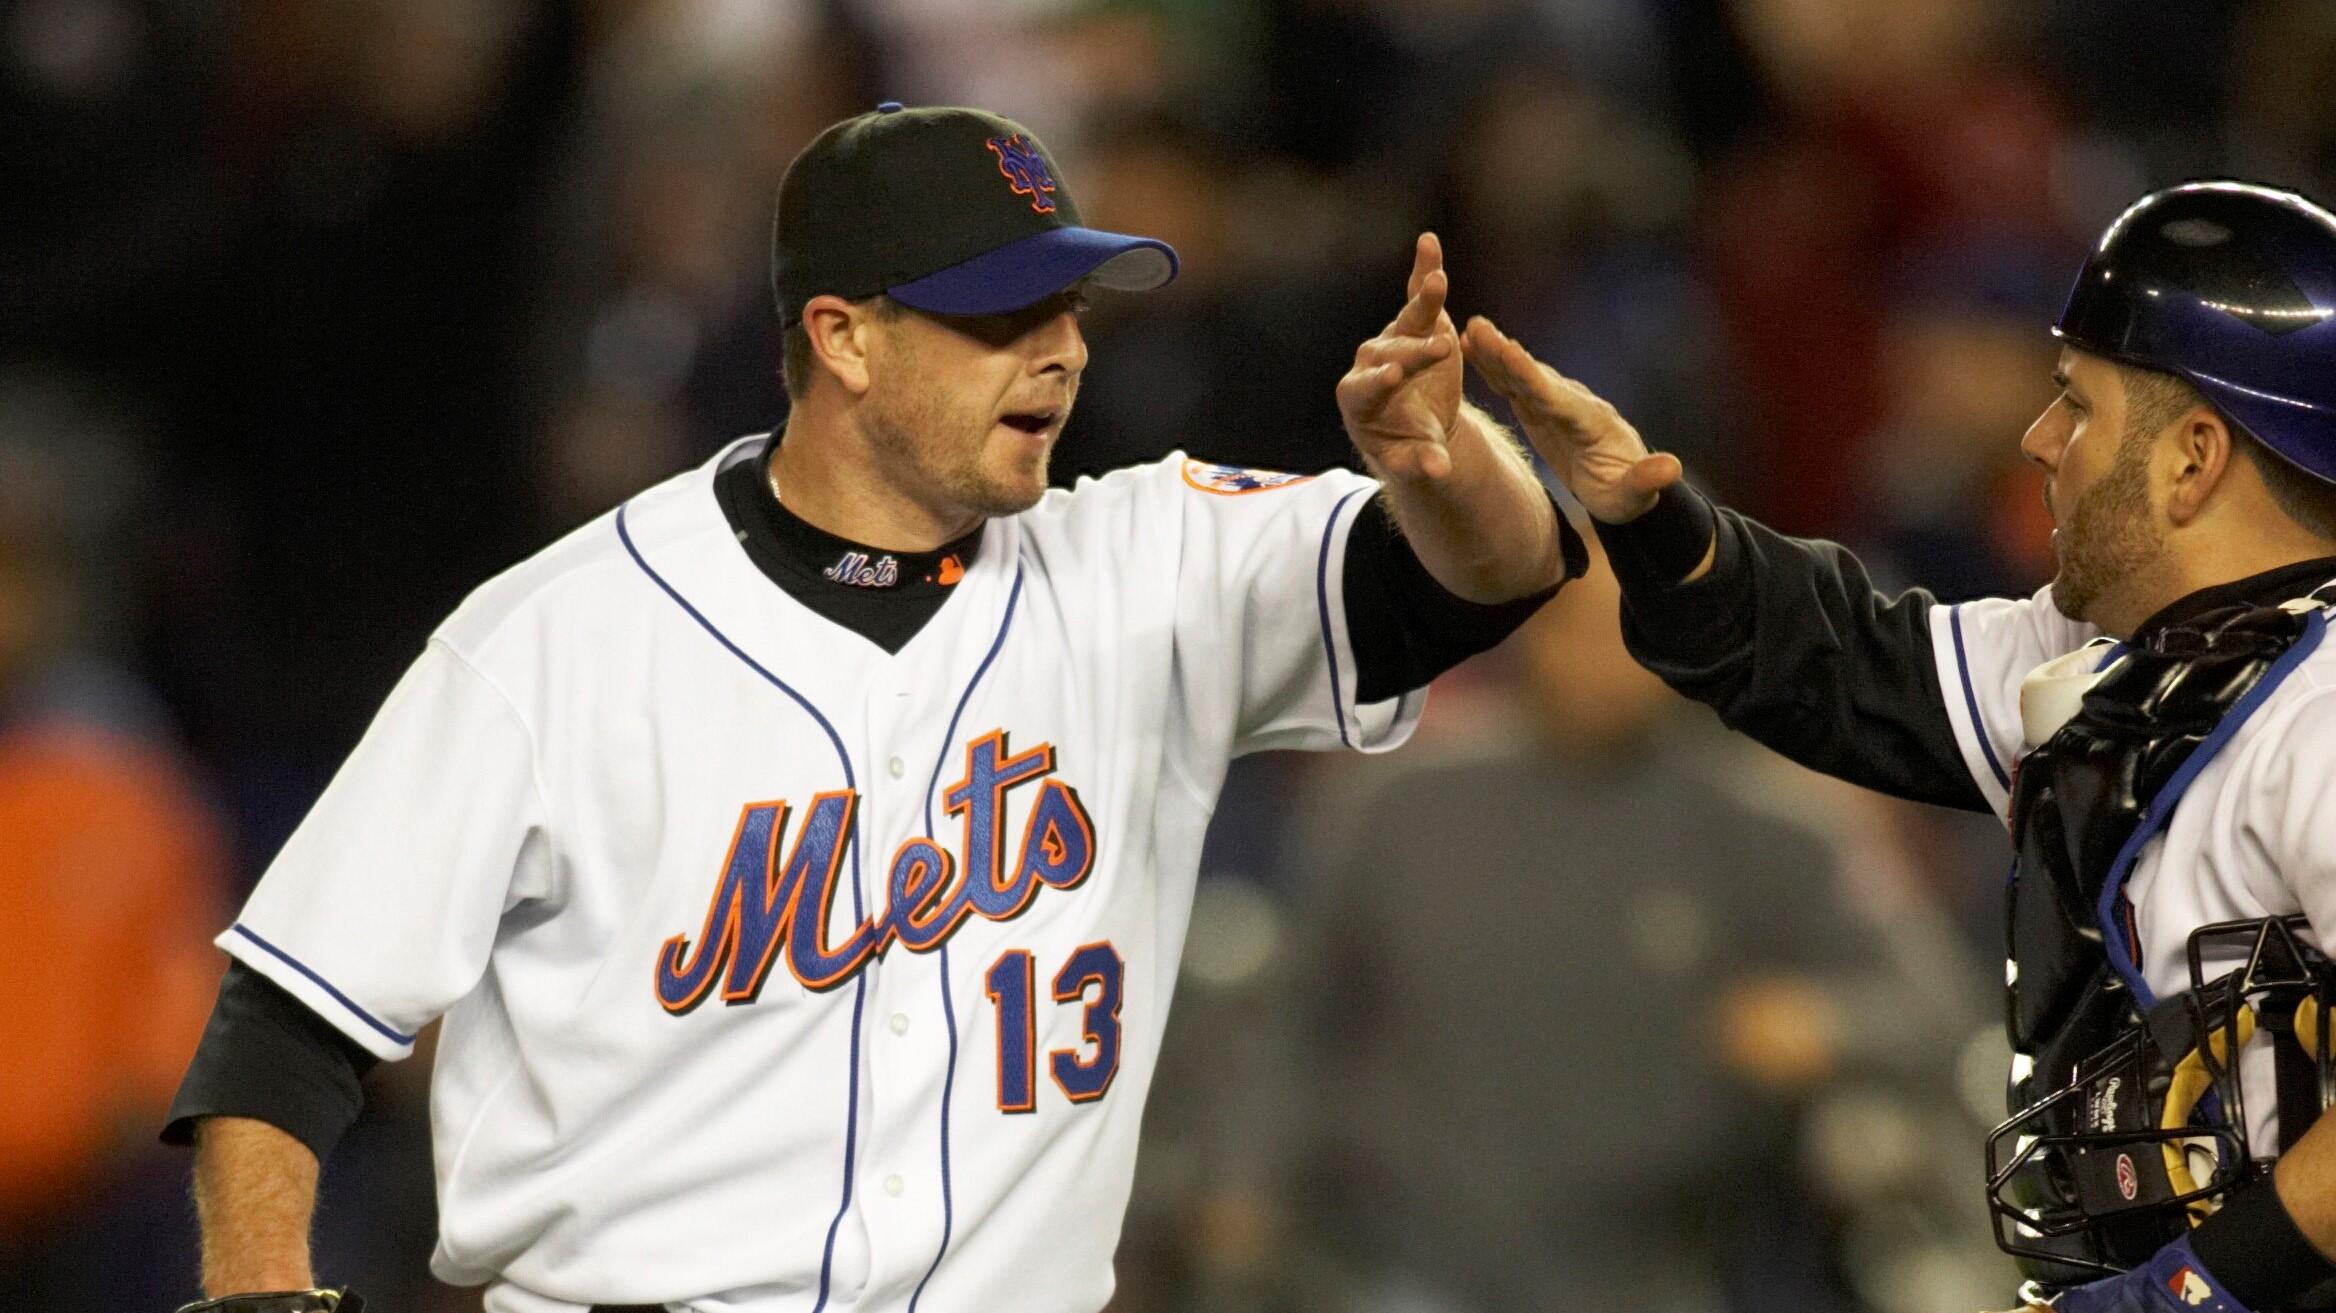 Oct 12, 2006; Flushing, NY, USA; New York Mets pitcher (13) Billy Wagner celebrates with catcher (16) Paul Lo Duca after recording the last out of game one of the National League Championship Series against the St. Louis Cardinals at Shea Stadium in Flushing, NY. The Mets defeated the Cardinals 2-0. Mandatory Credit: Howard Smith-USA TODAY Sports Copyright © 2006 Howard Smith / Howard Smith-USA TODAY Sports